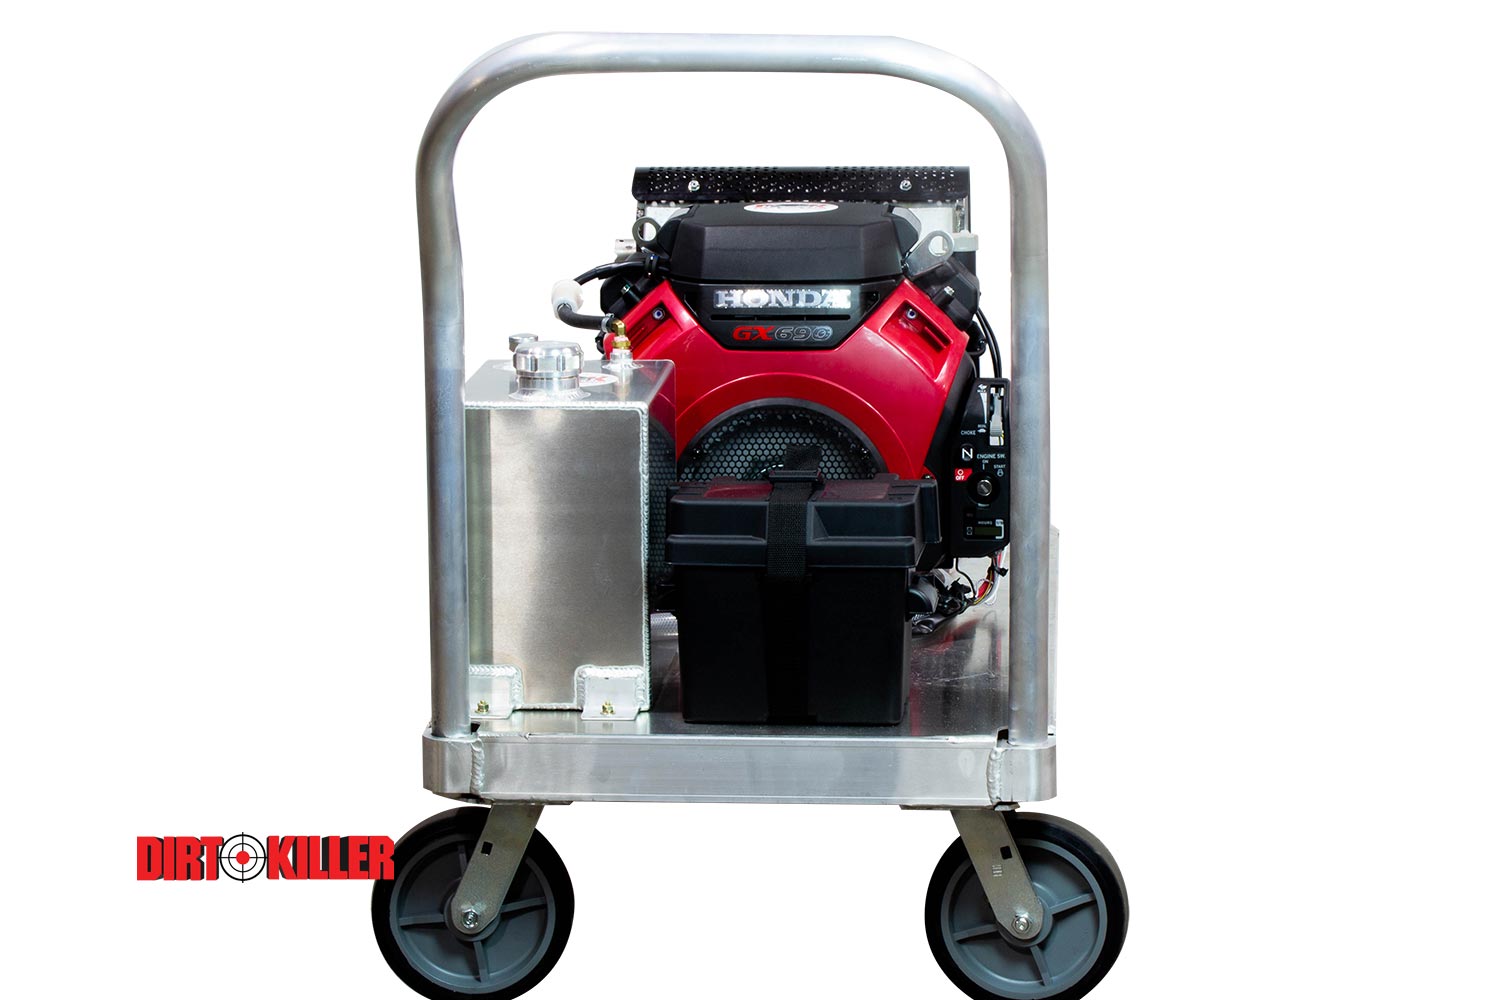 The Beast Dirt Monkee - Cold Water Pressure Washer 5.5 GPM @ 5000 PSI with Honda GX690-image_1.5 GPM @ 5000 PSI with Honda GX690-image_1